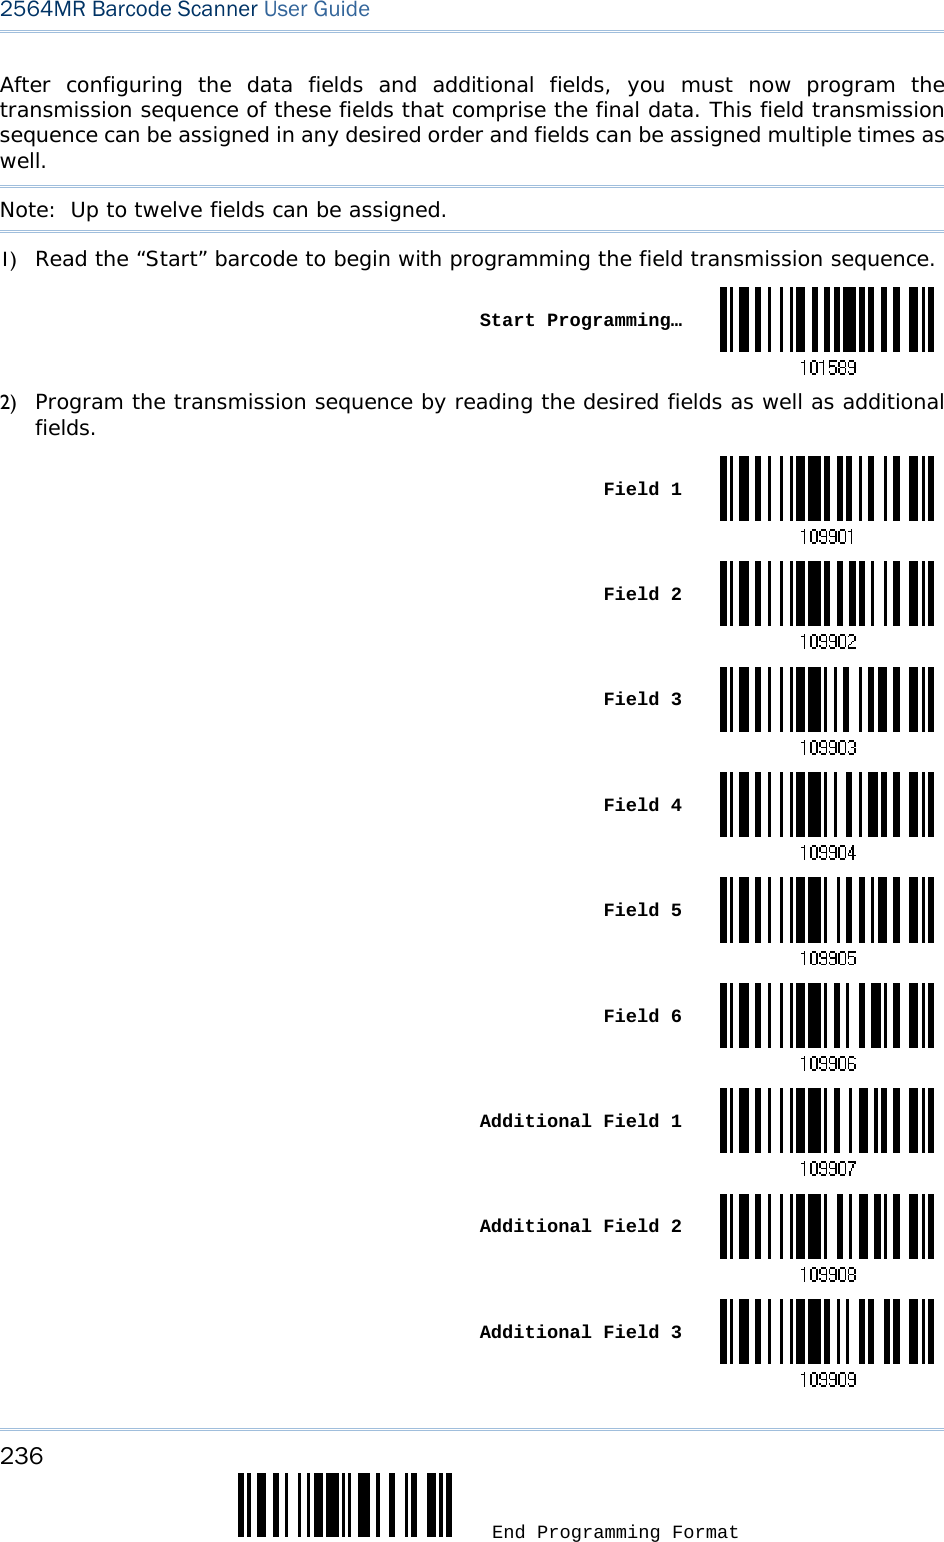 236  End Programming Format 2564MR Barcode Scanner User Guide  After configuring the data fields and additional fields, you must now program the transmission sequence of these fields that comprise the final data. This field transmission sequence can be assigned in any desired order and fields can be assigned multiple times as well.  Note:  Up to twelve fields can be assigned. 1) Read the “Start” barcode to begin with programming the field transmission sequence.  Start Programming…2) Program the transmission sequence by reading the desired fields as well as additional fields.  Field 1 Field 2 Field 3 Field 4 Field 5 Field 6 Additional Field 1 Additional Field 2 Additional Field 3